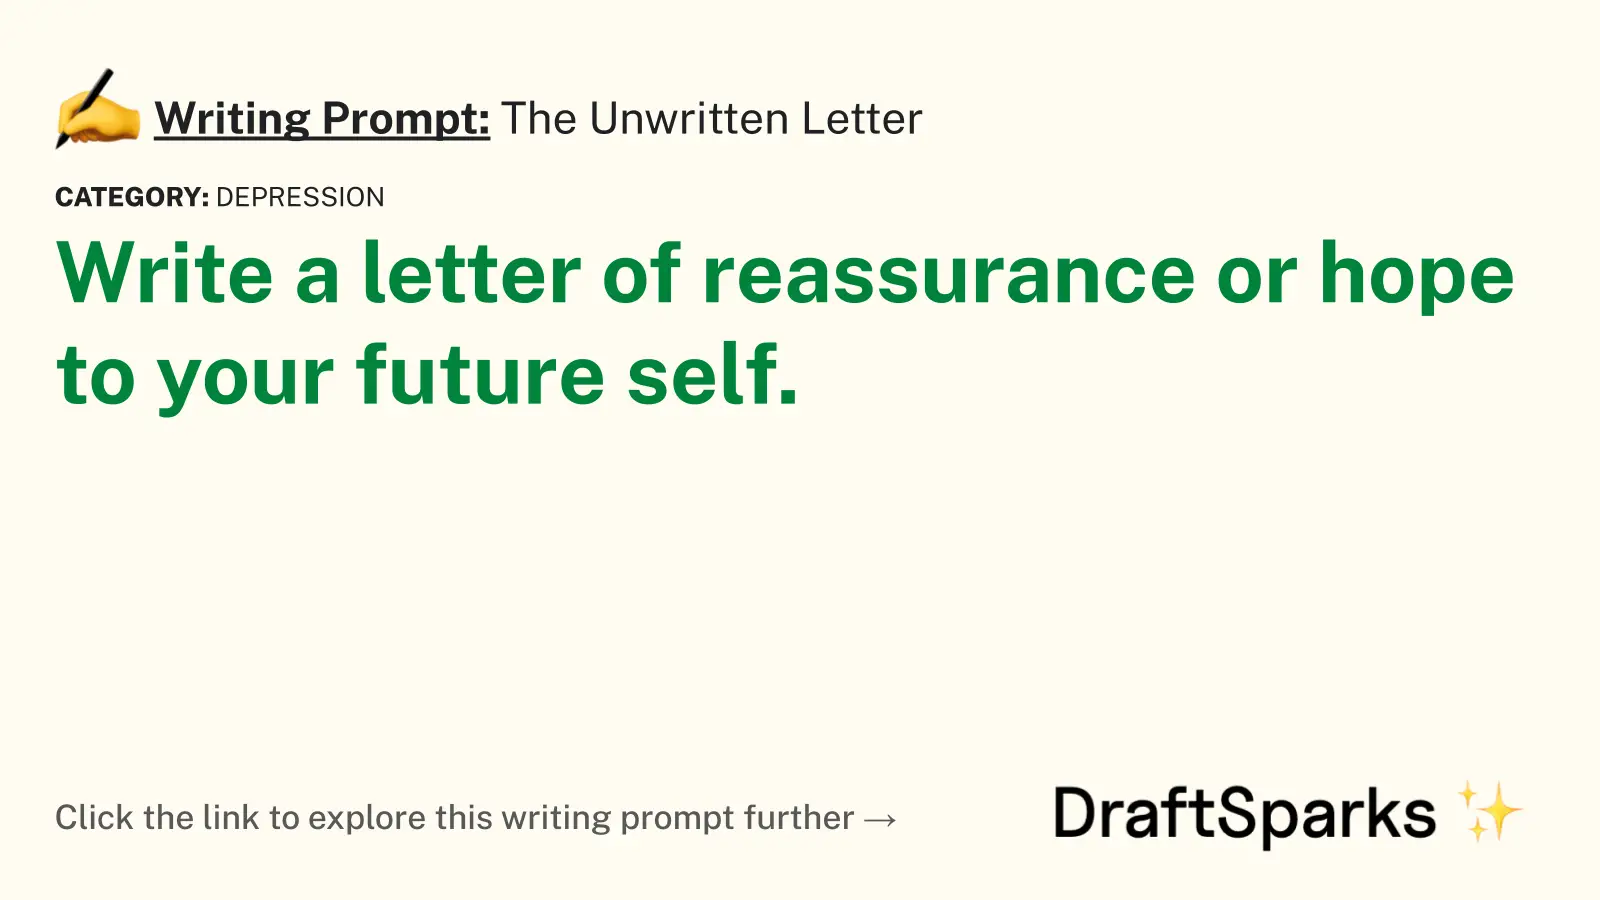 The Unwritten Letter